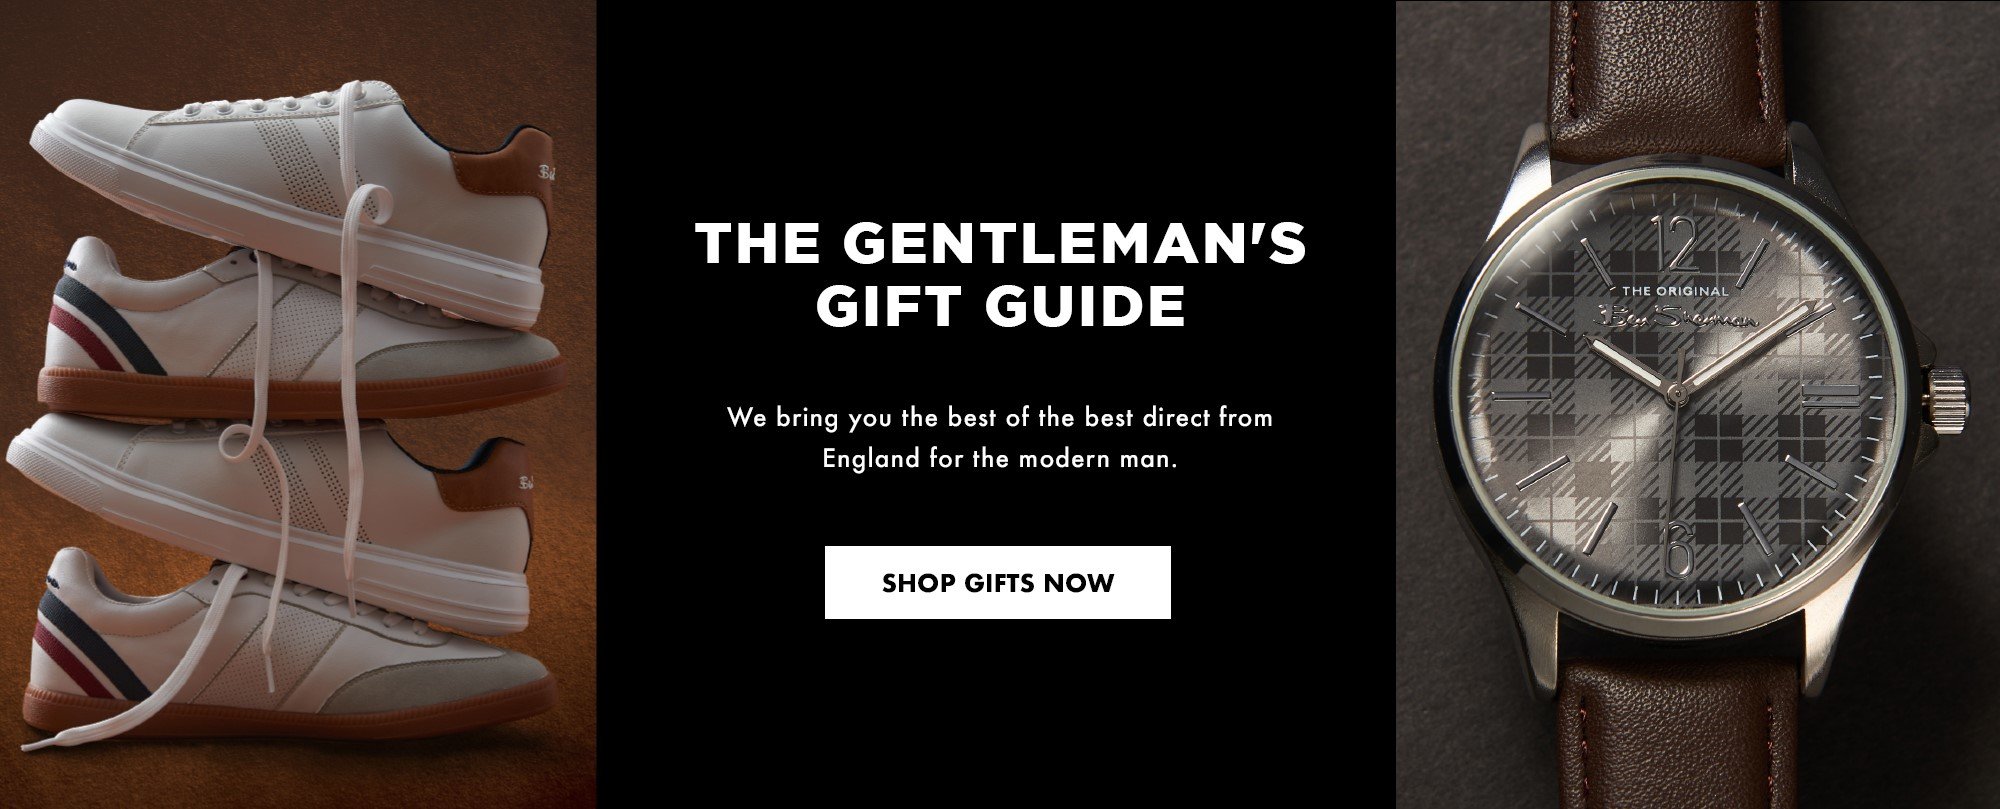 THE GENTLEMAN'S GIFT GUIDE - SHOP NOW